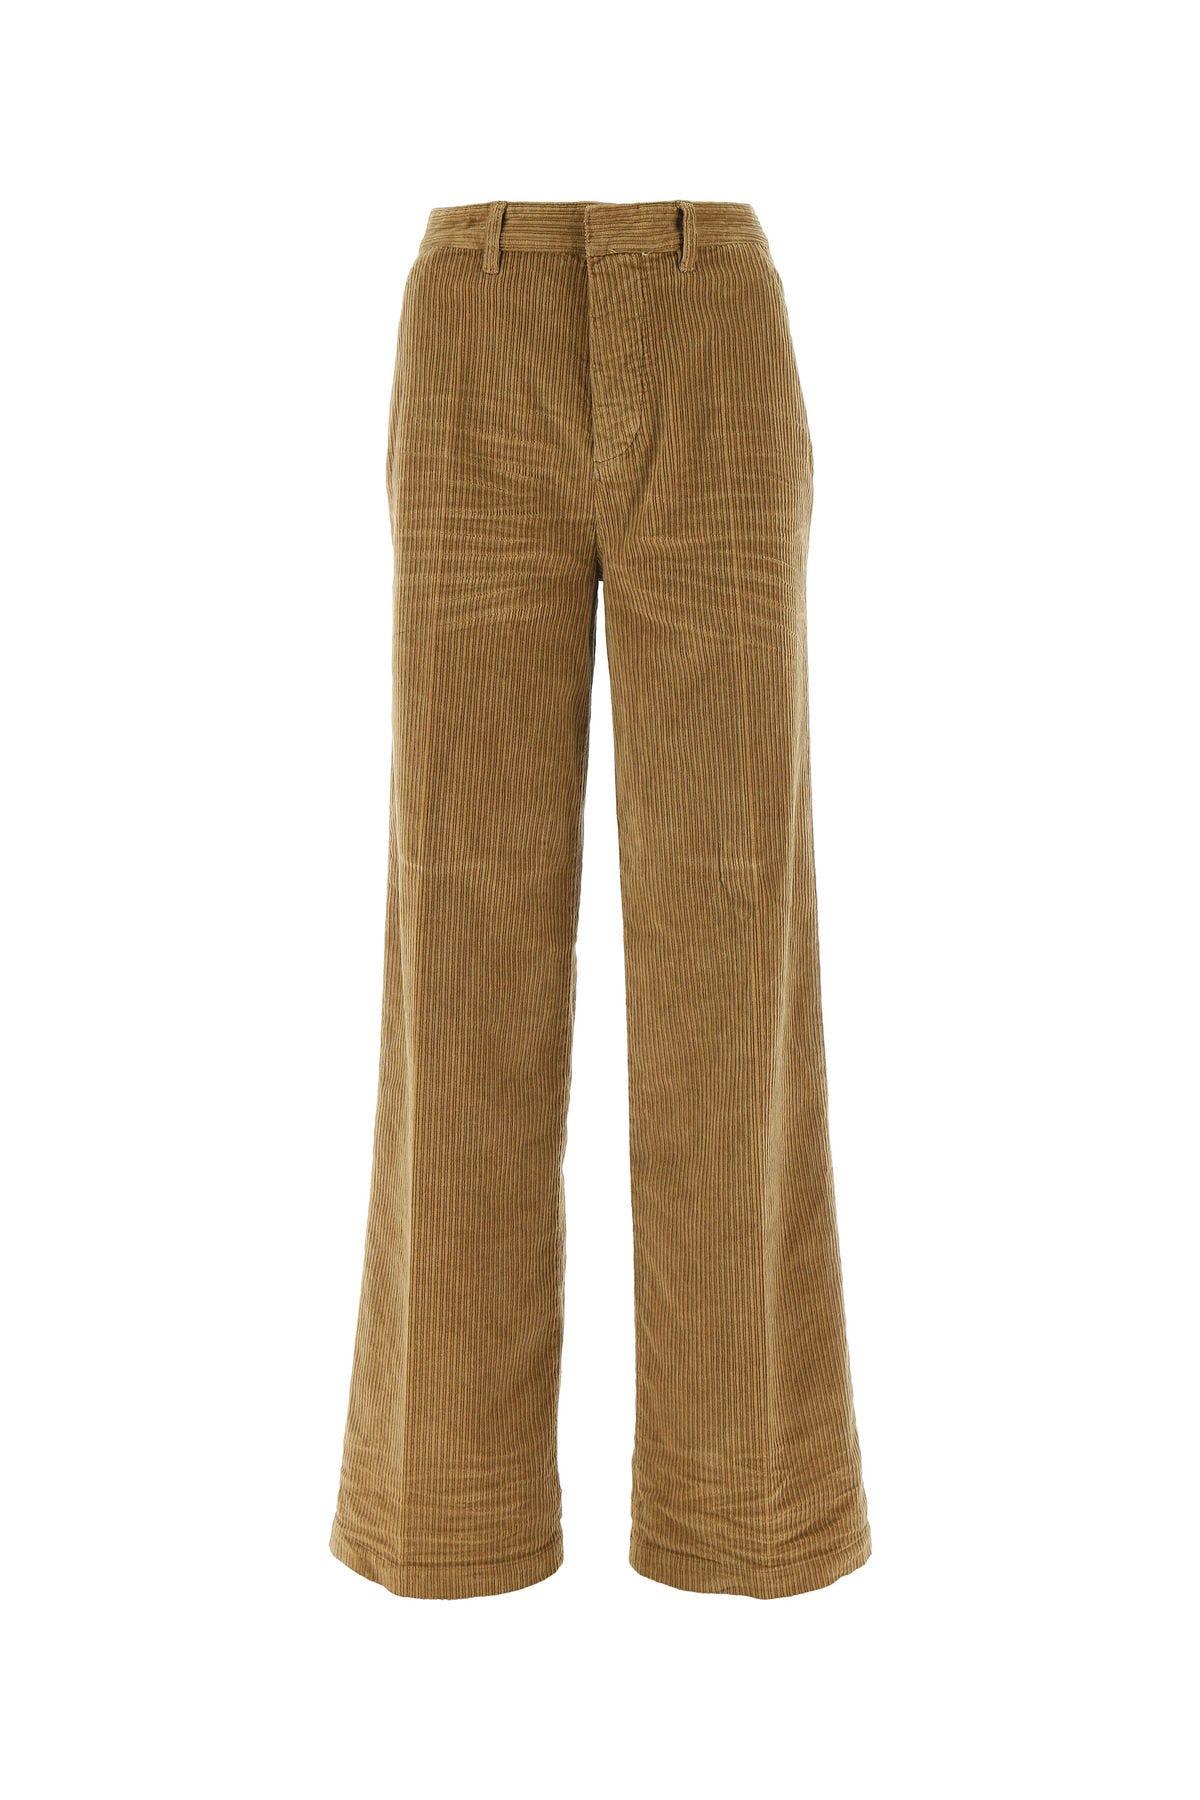 Dsquared2 Biscuit Corduroy Wide-leg Traveller Pant